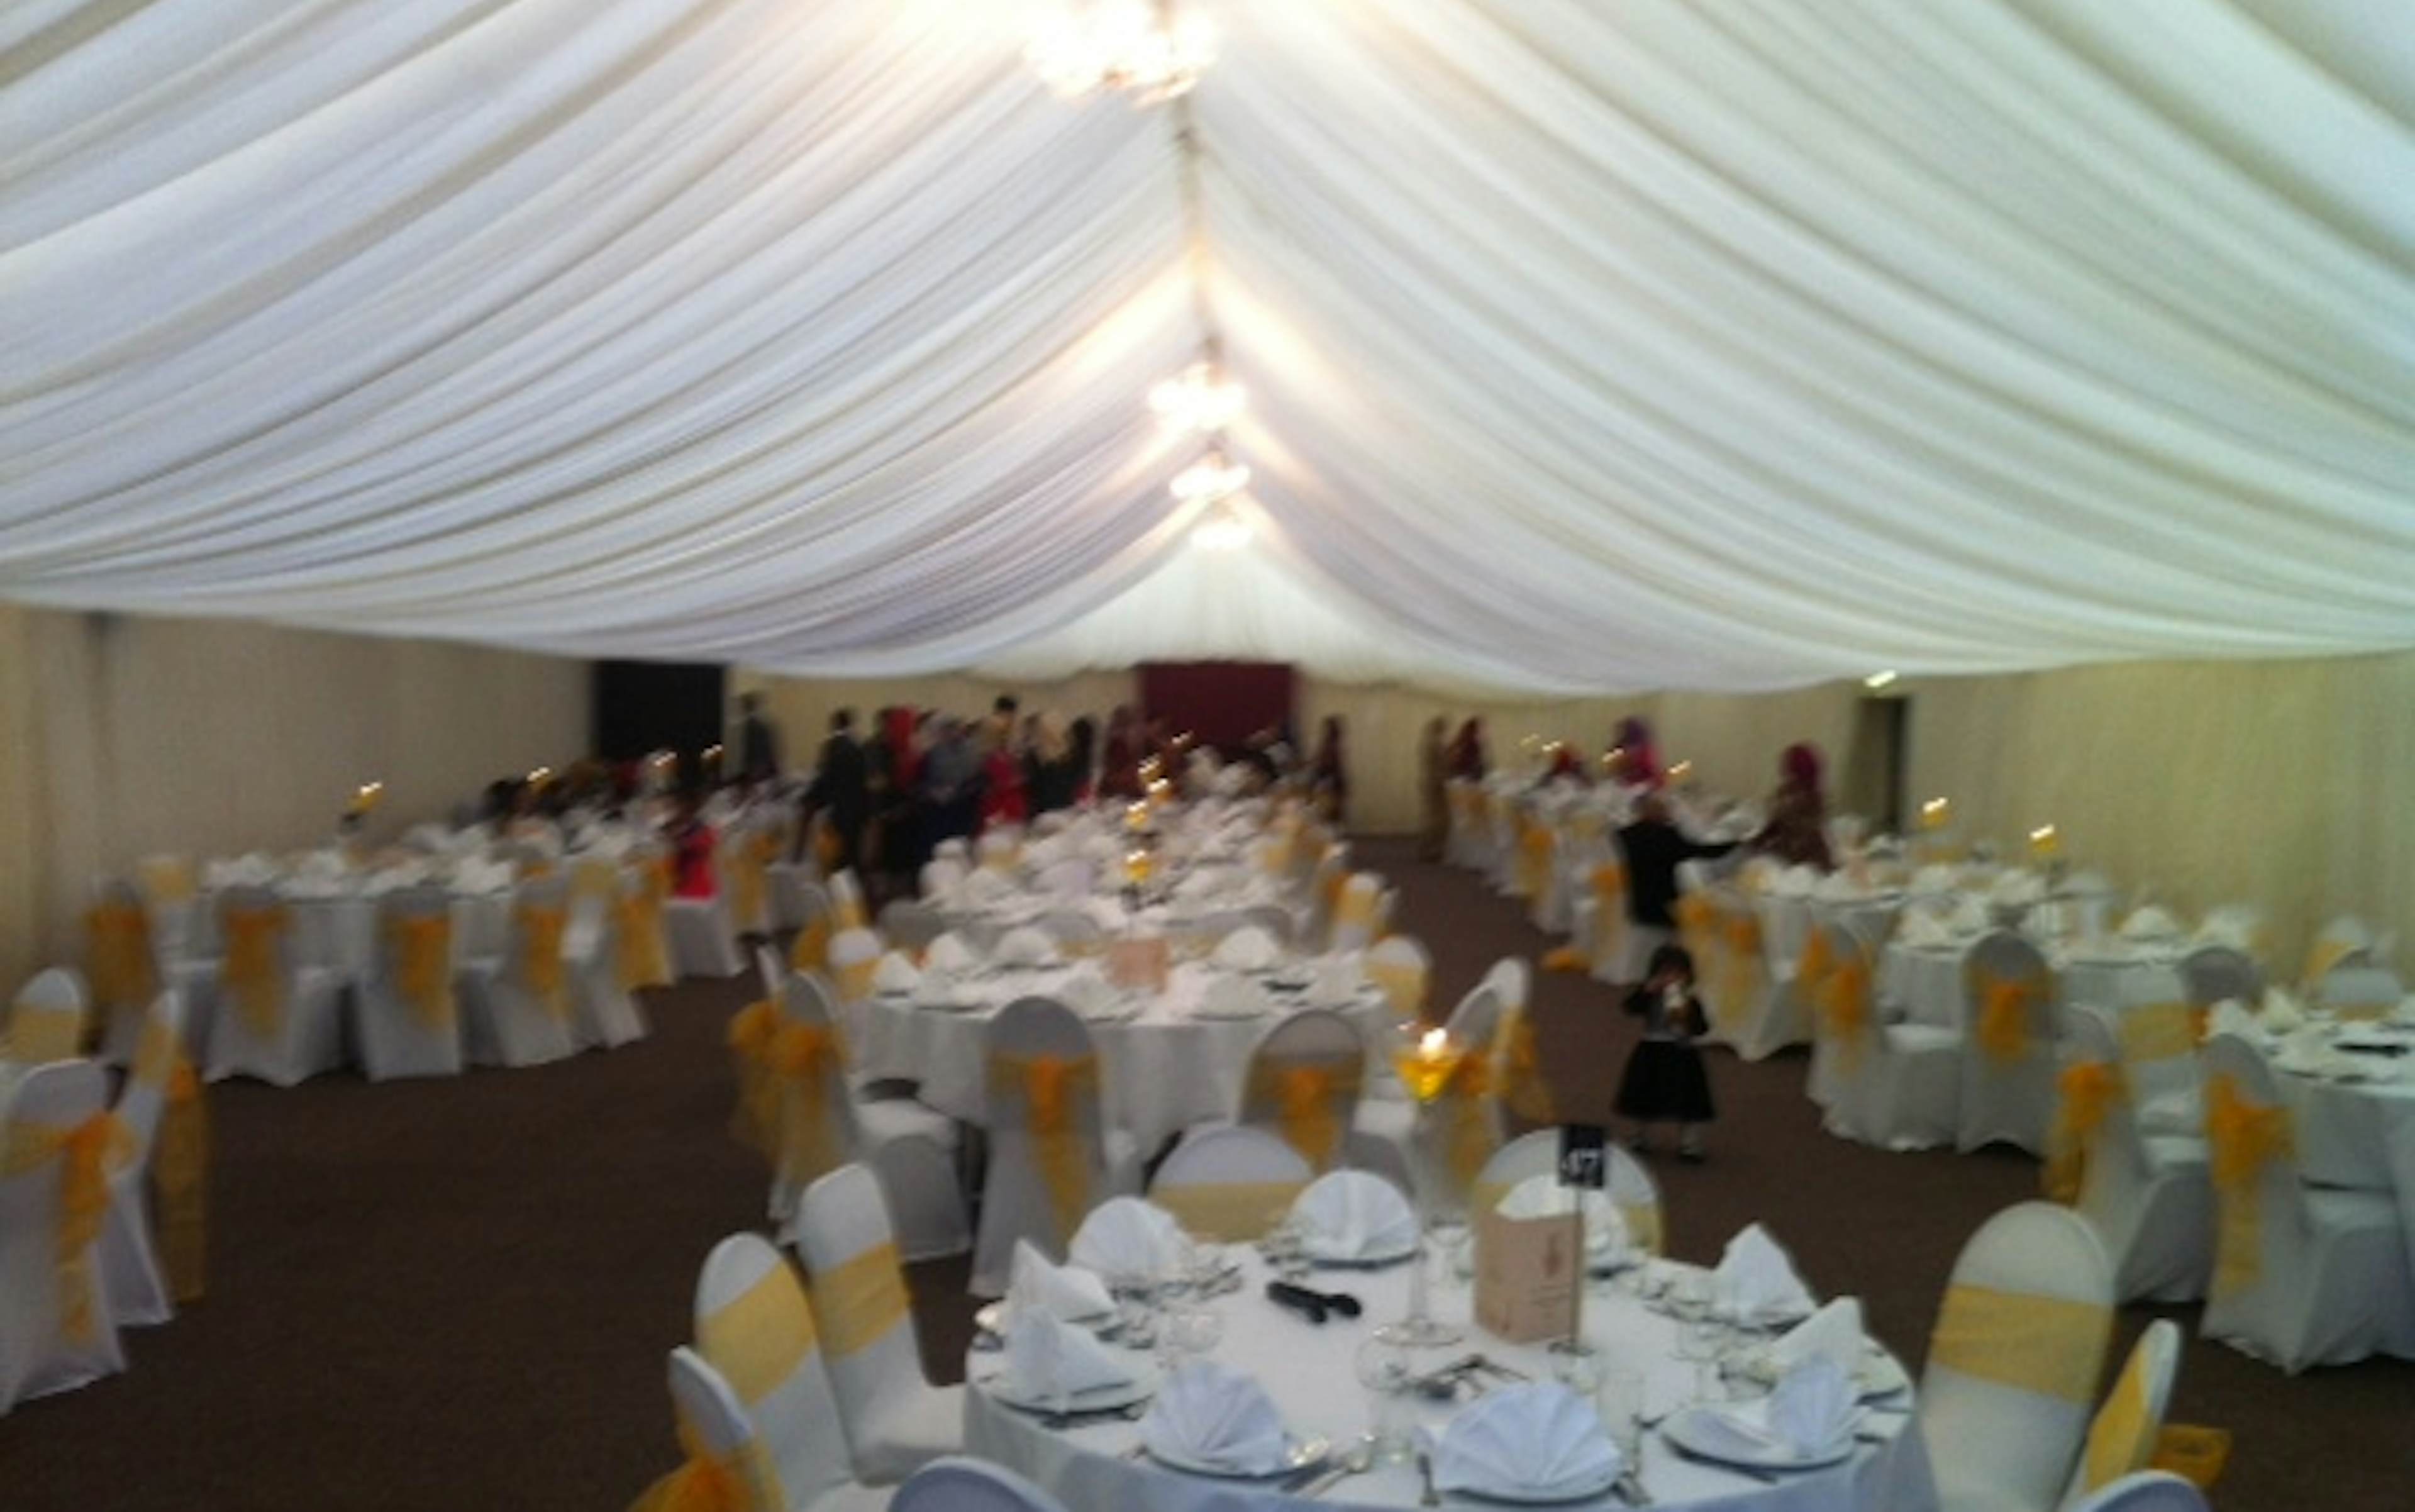 Hop Farm - The Dray Marquee image 1